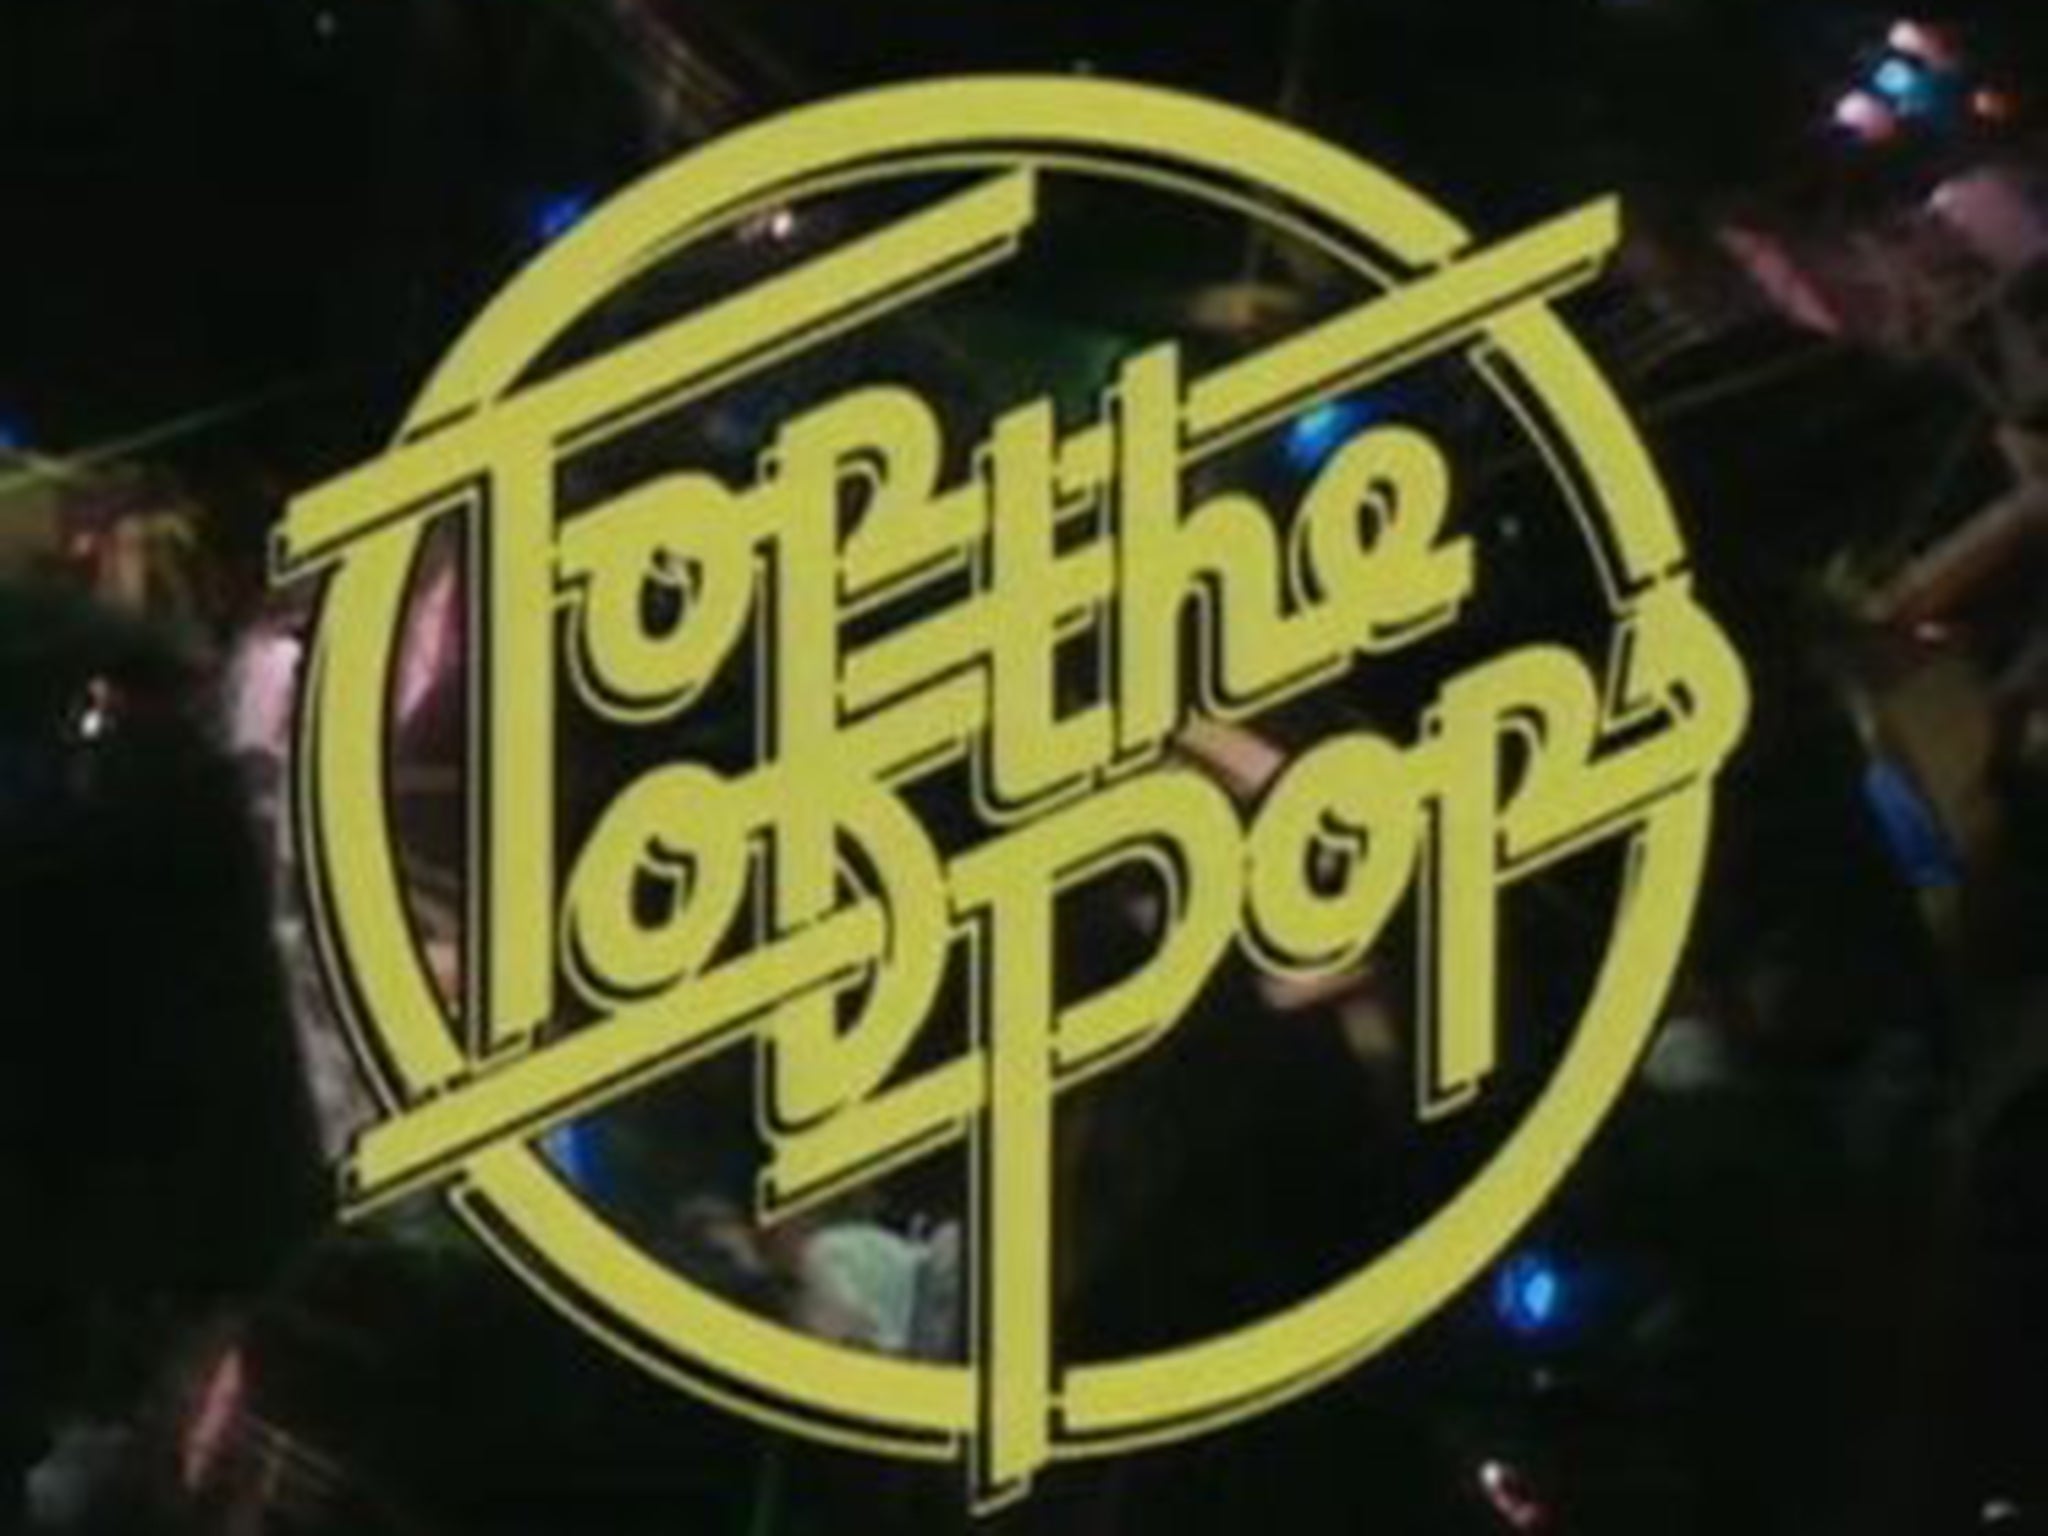 Top of the Pops was one of the biggest shows on TV